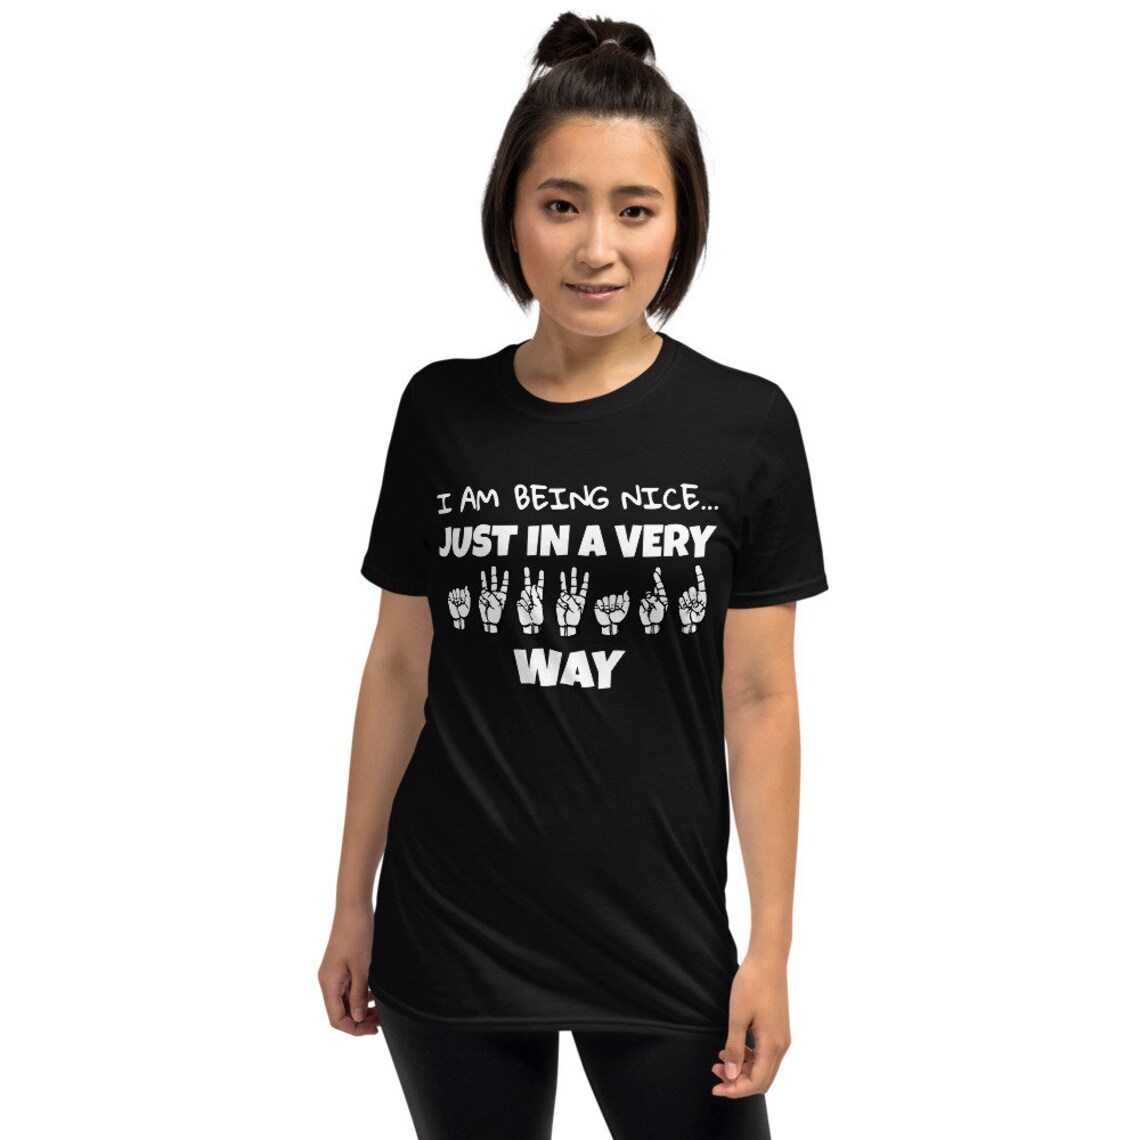 ASL Unisex Shirt I Am Being Nice Just In A Very AWKWARD